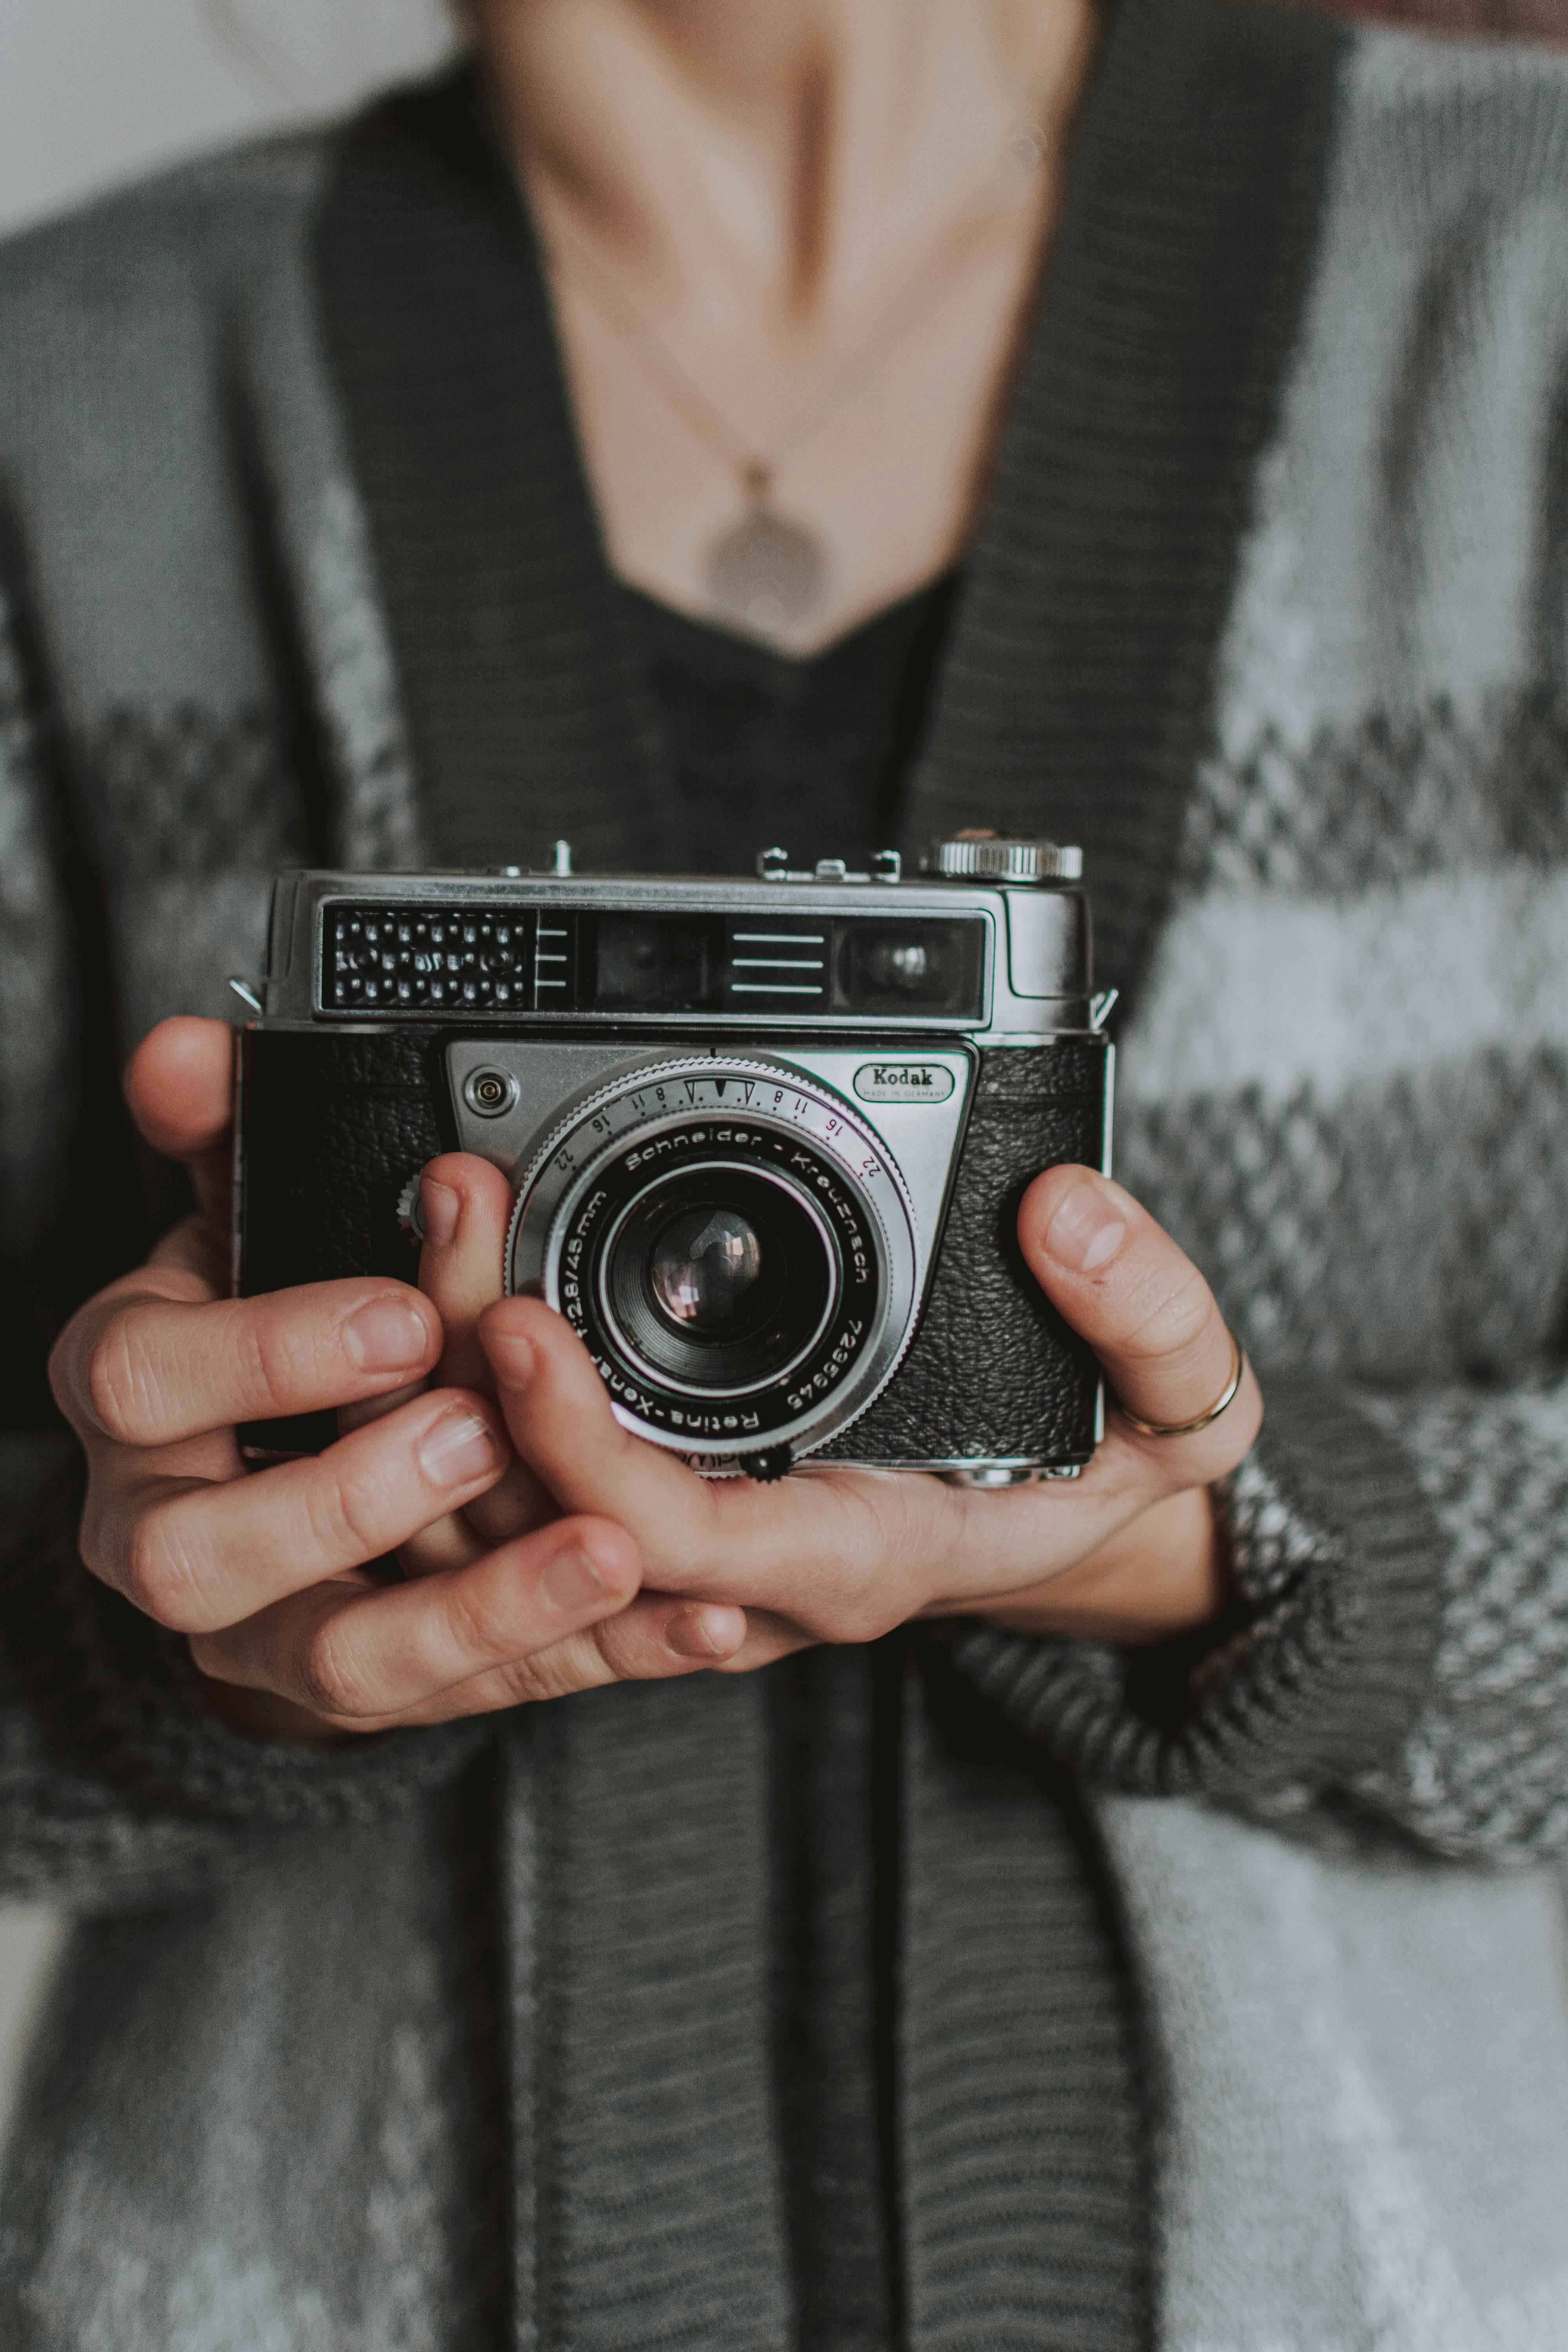 Woman holding an analog camera | Source: Pexels